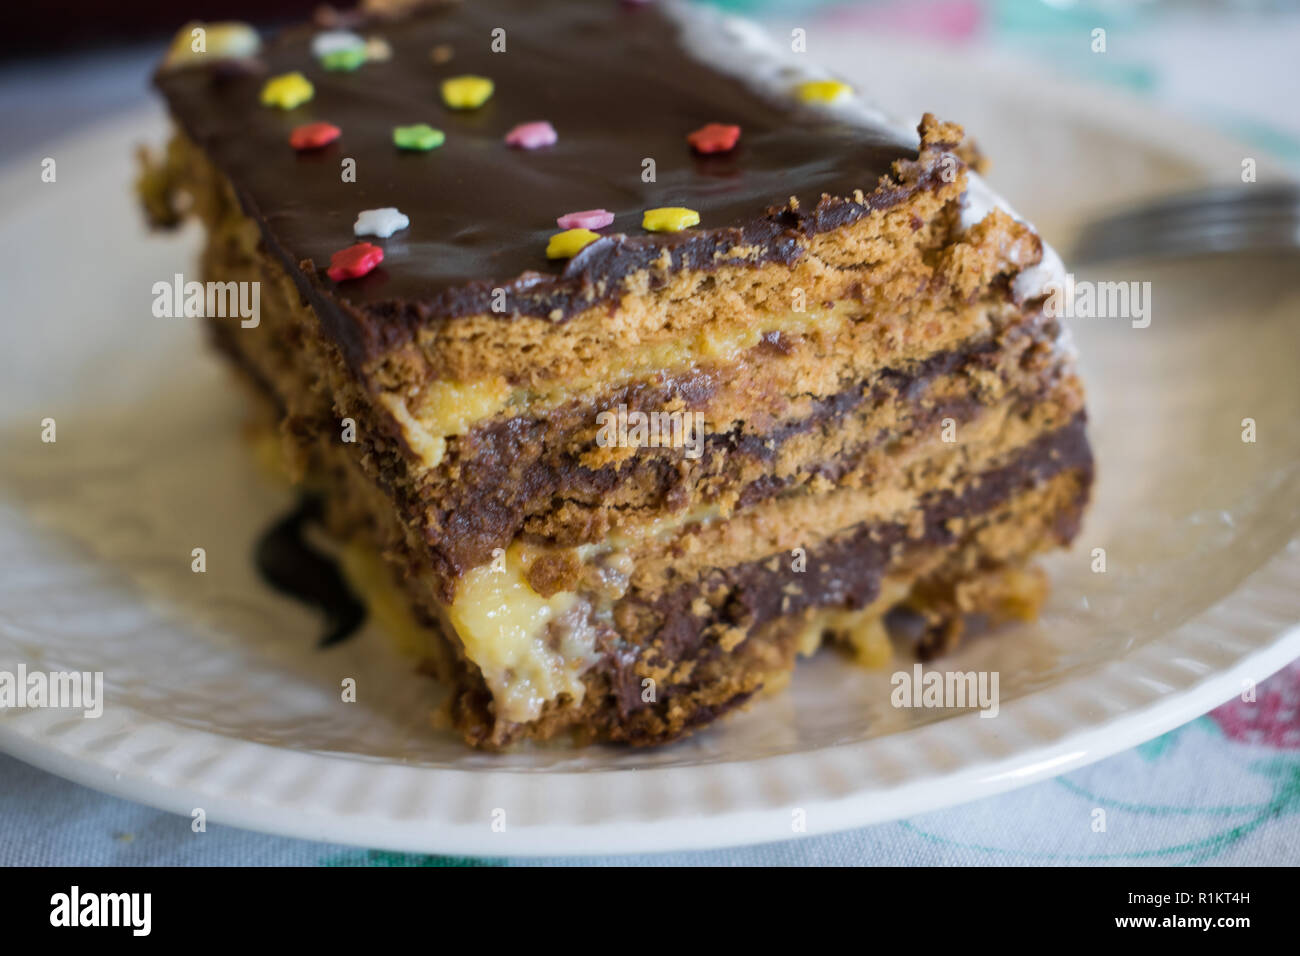 Portion of cake with biscuits, chocolate and vanilla decorated with colorful sprinkles. Selective focus Stock Photo